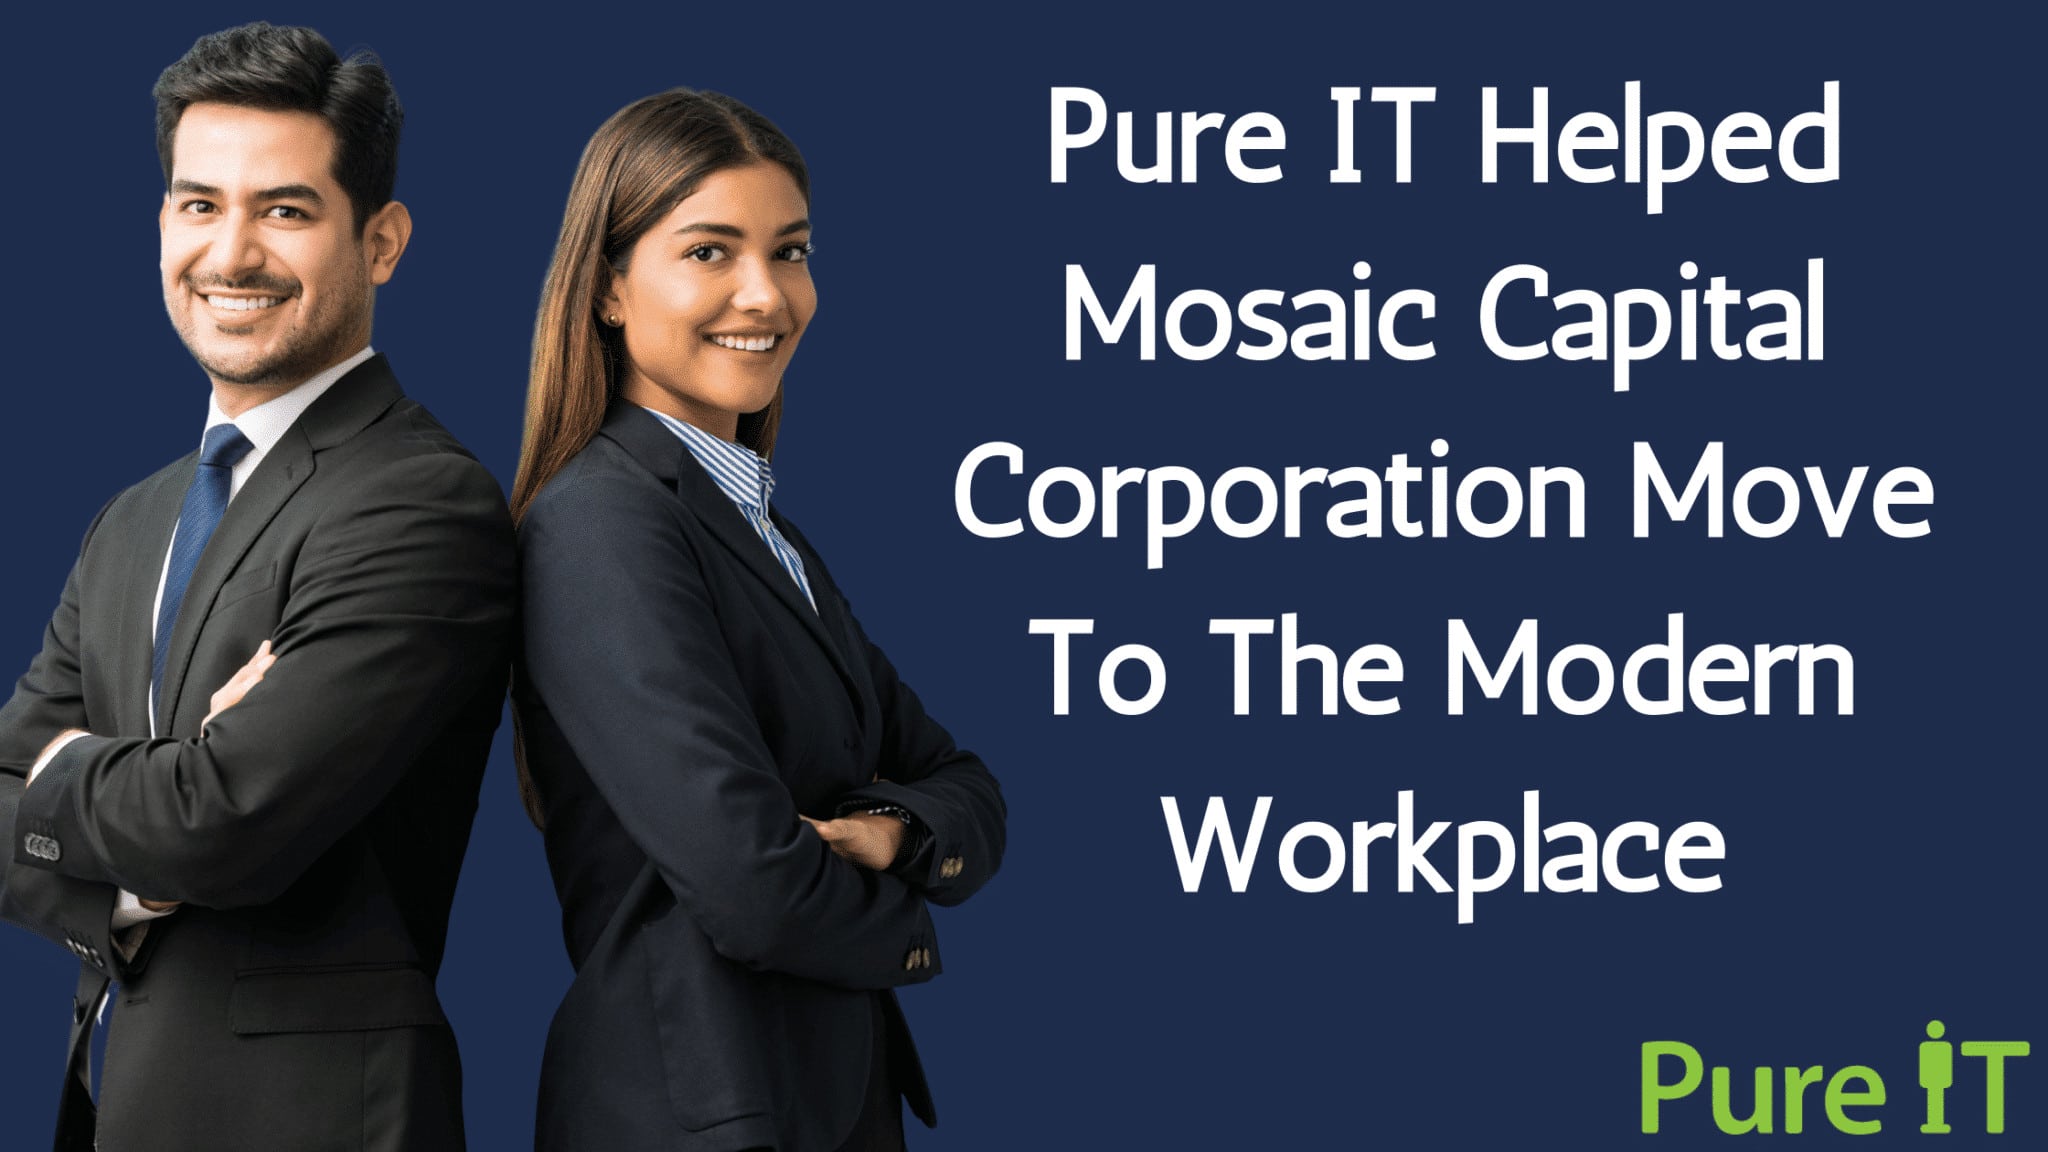 Pure IT Helped Mosaic Capital Corporation Move To The Modern Workplace